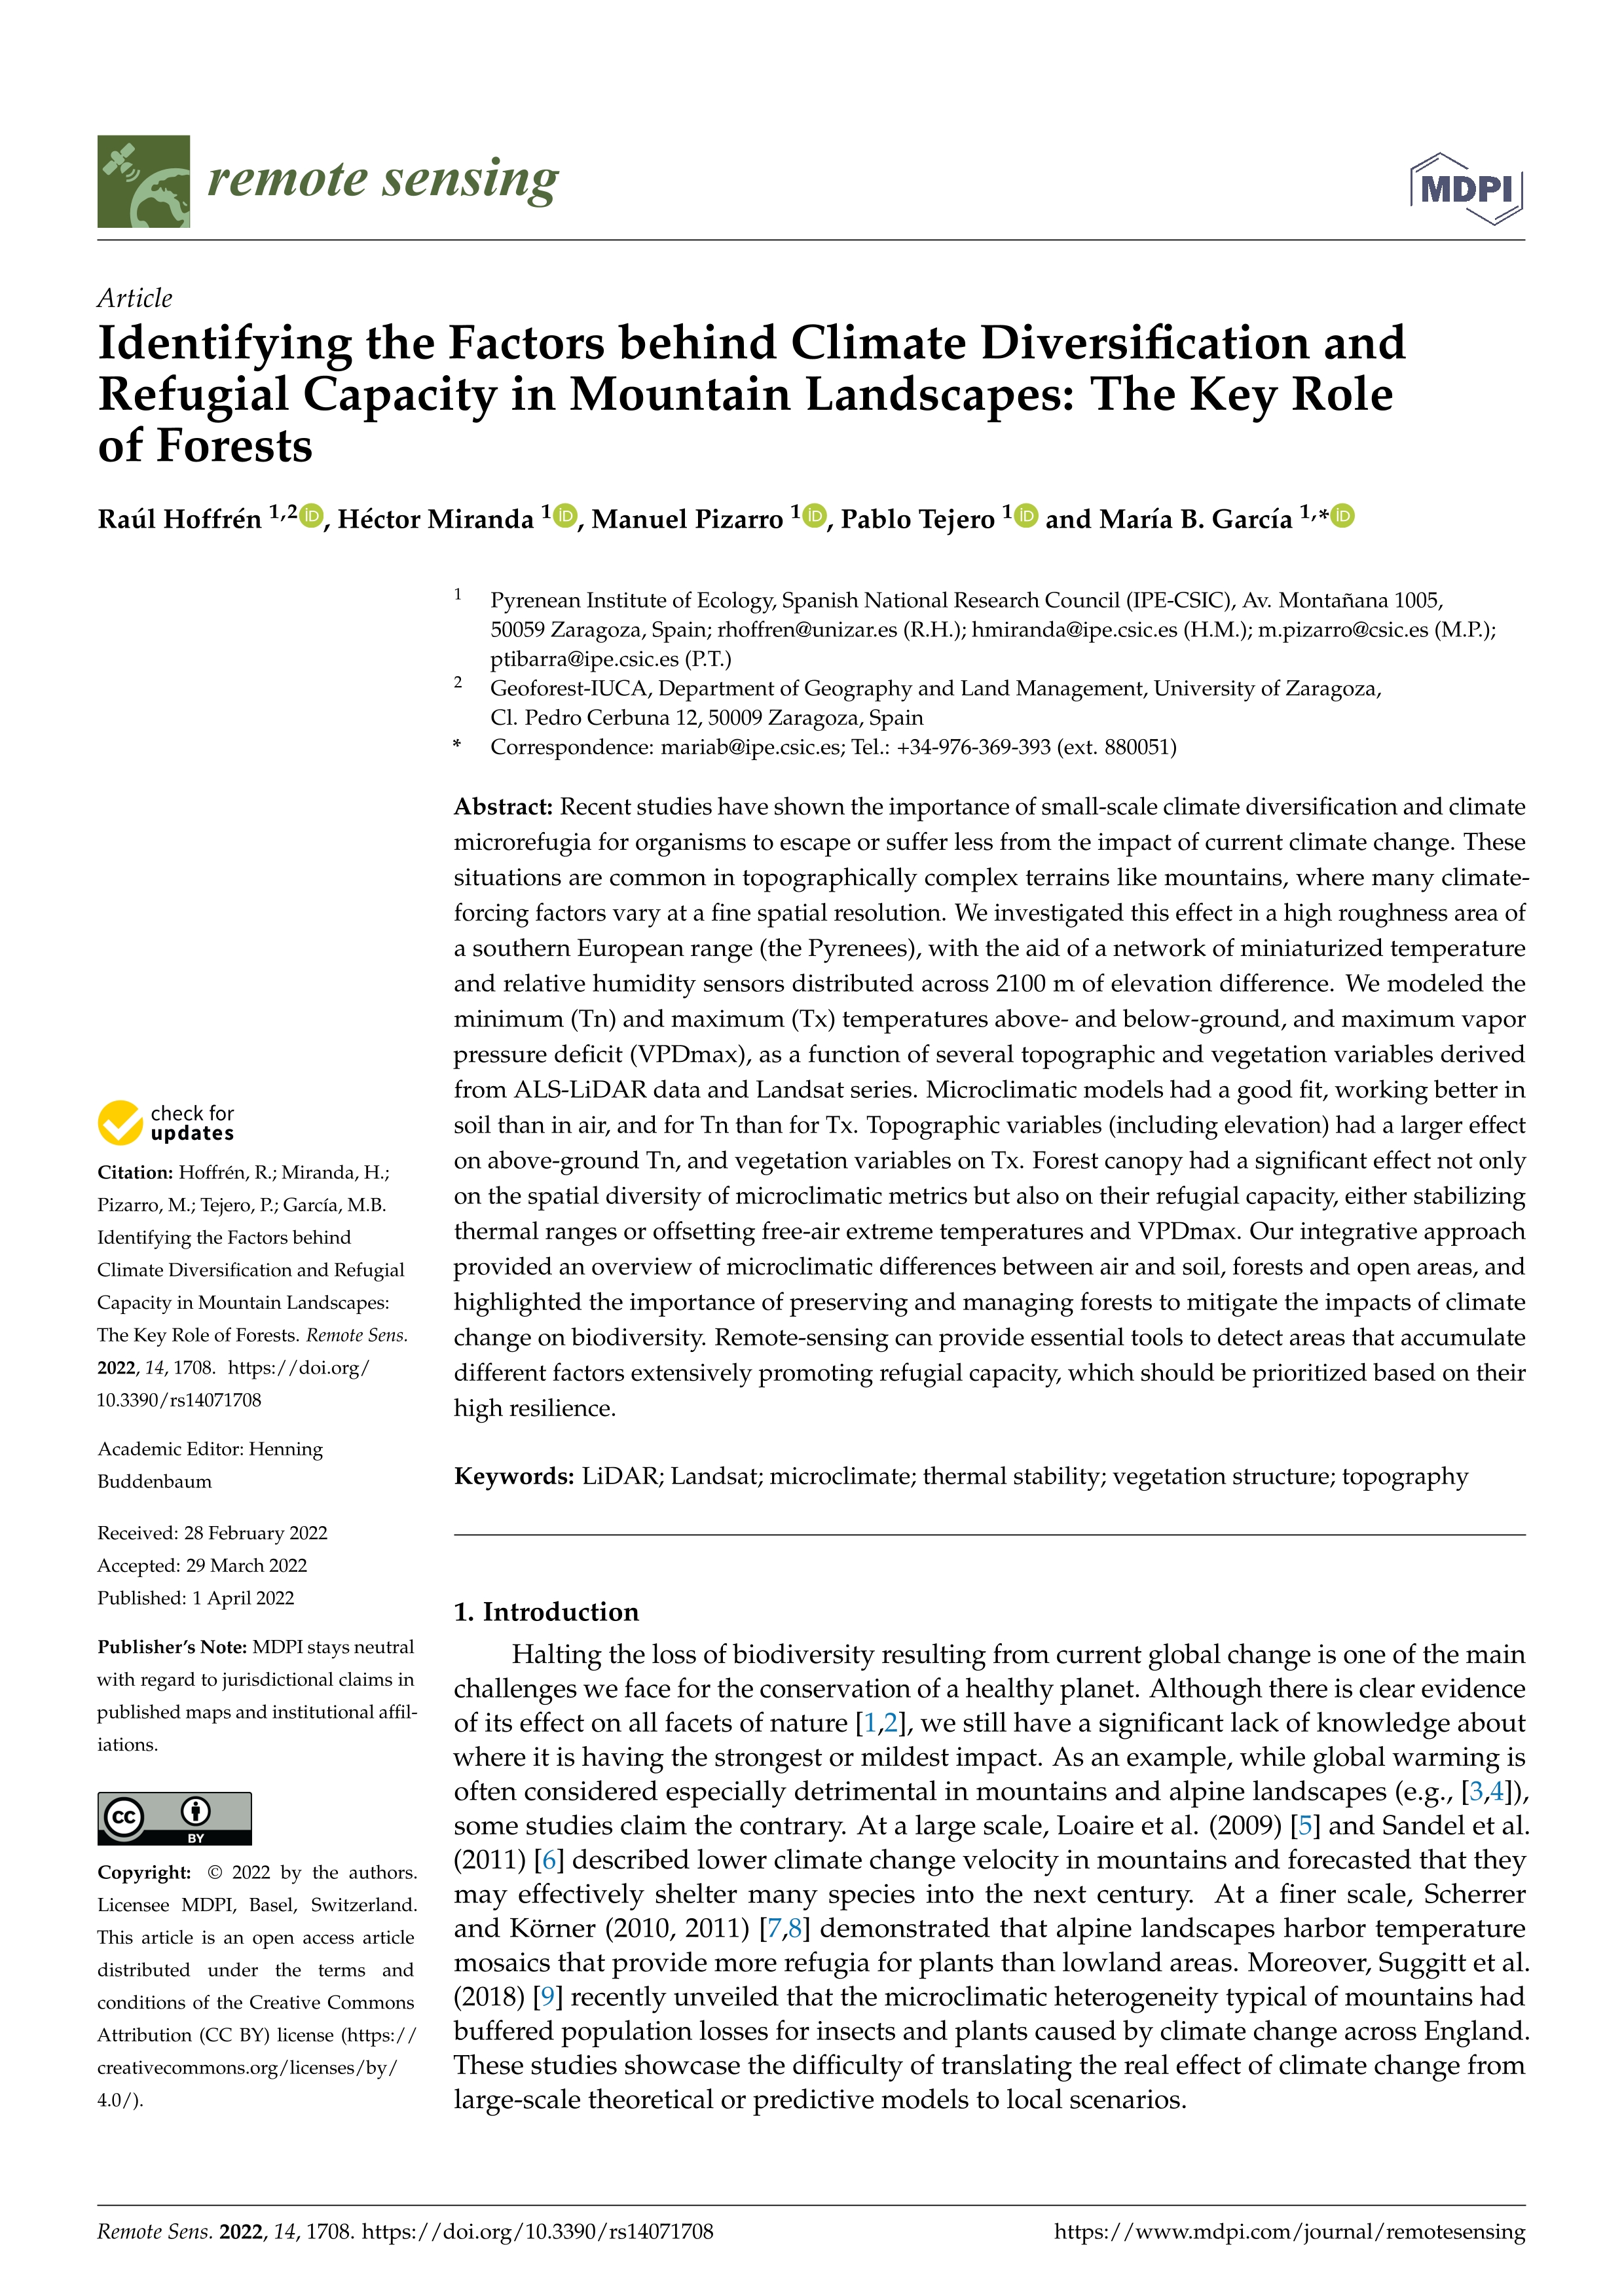 Identifying the Factors behind Climate Diversification and Refugial Capacity in Mountain Landscapes: The Key Role of Forests